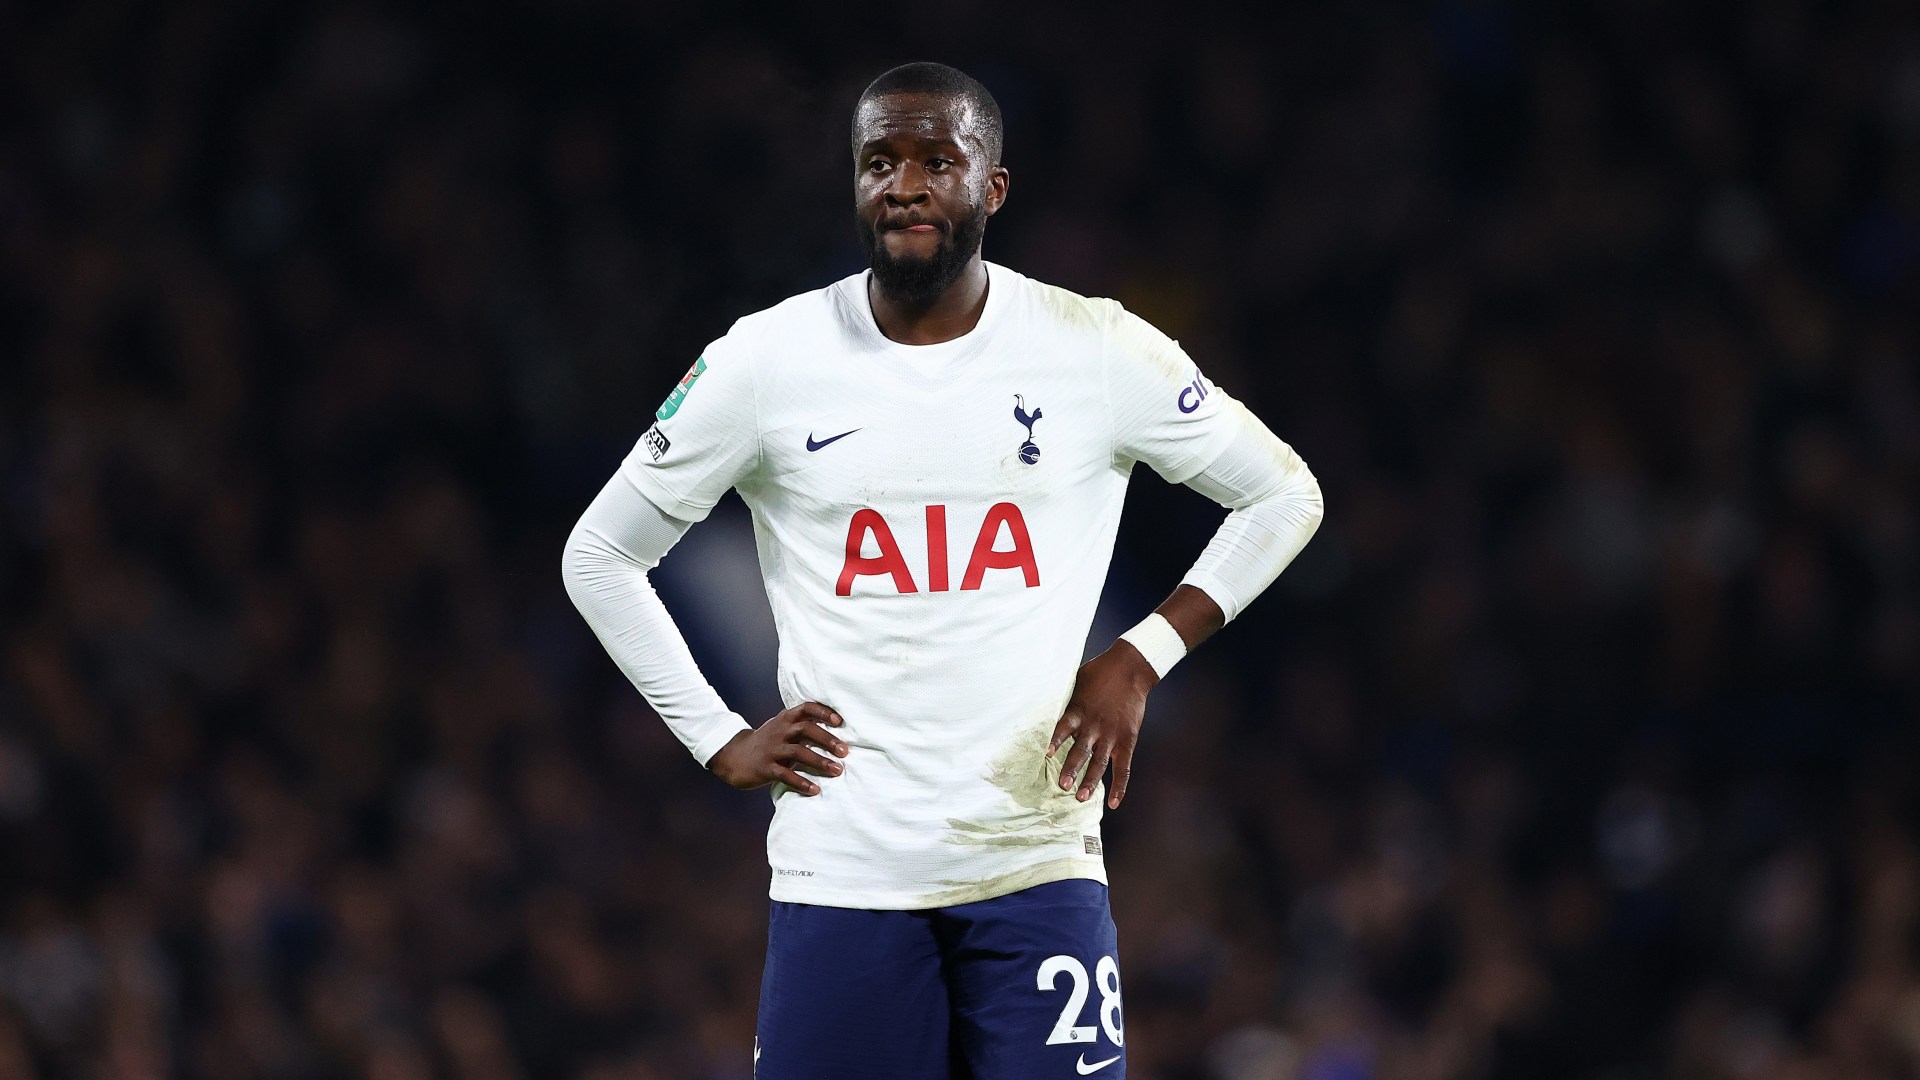 Tanguy Ndombele brutally shot down Genoa after they arranged private jet for him to join on loan from Tottenham